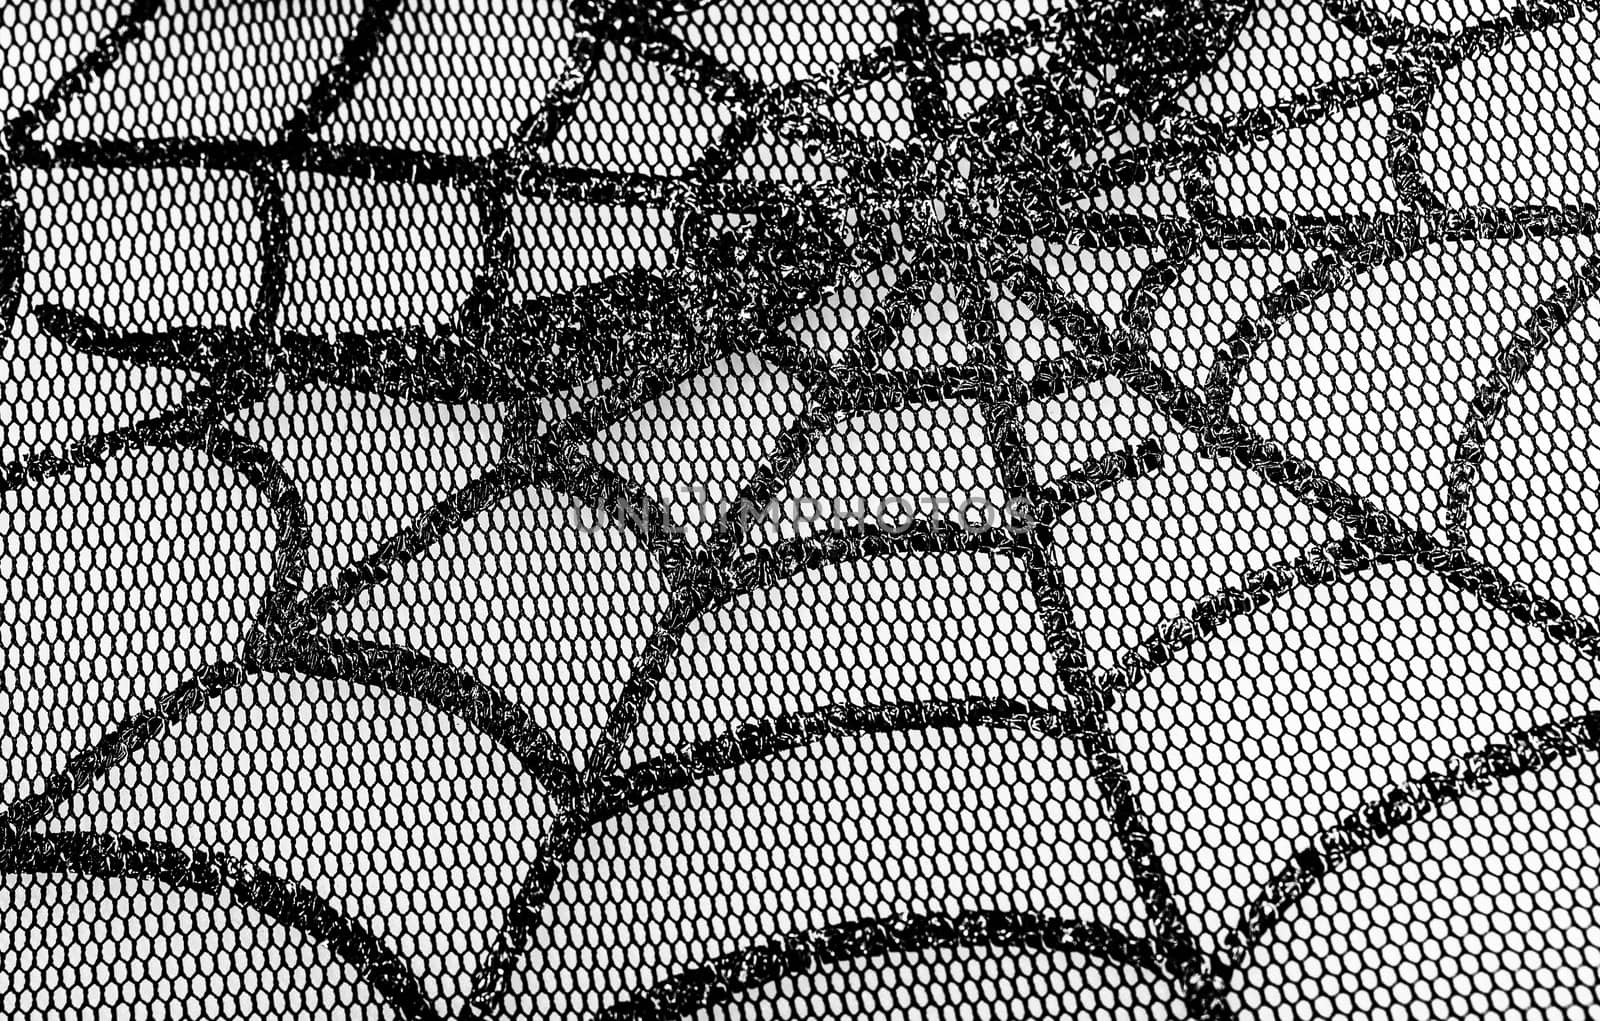 Mesh Web photographed close up for background on halloween